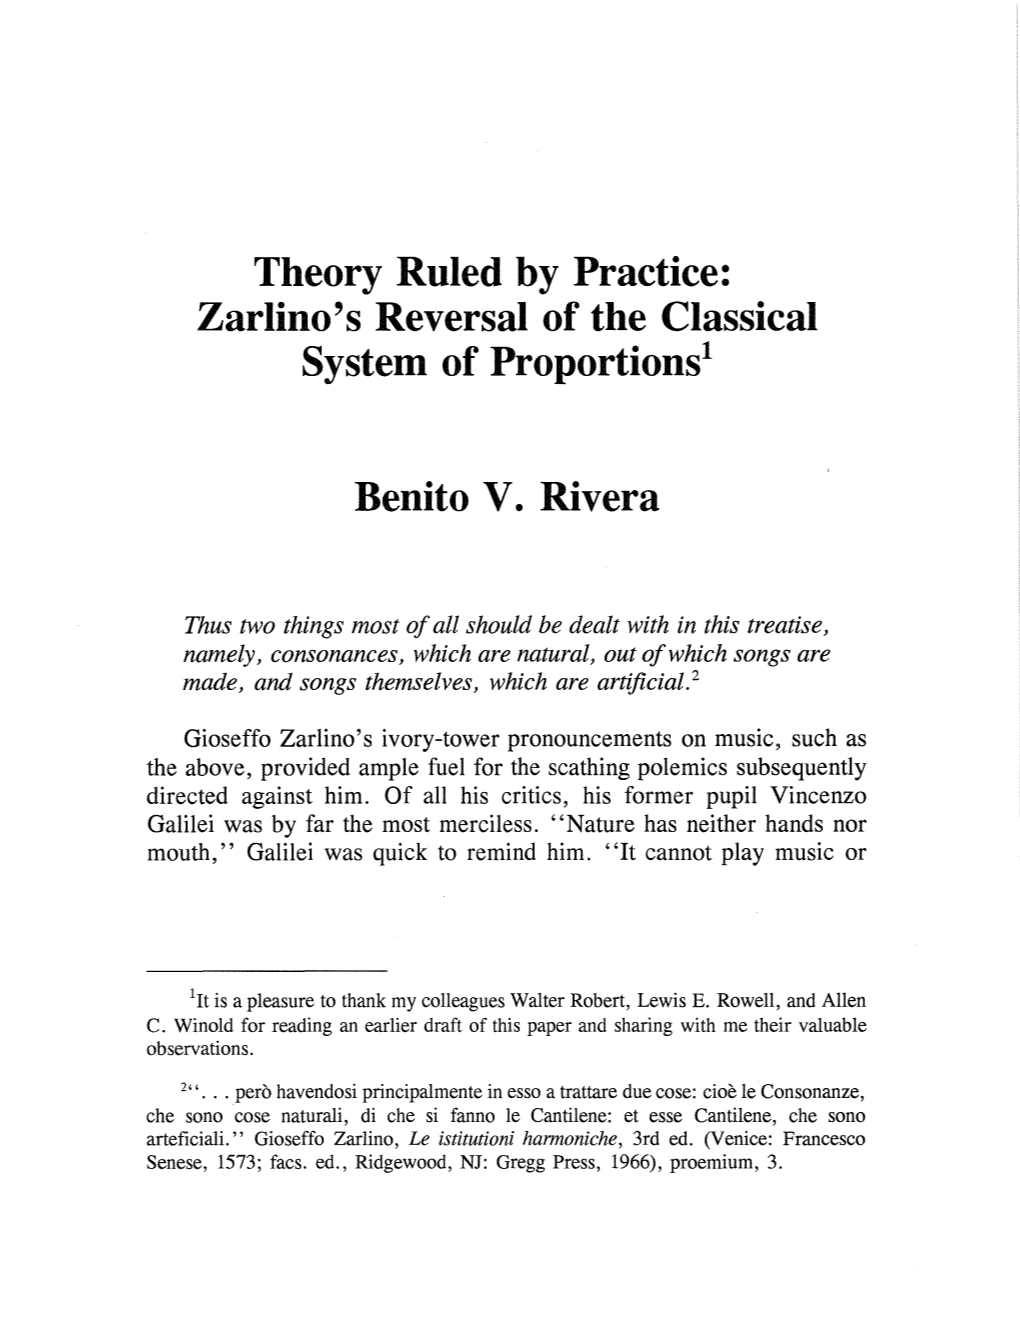 Zarlino's Reversal of the Classical System of Proportions!